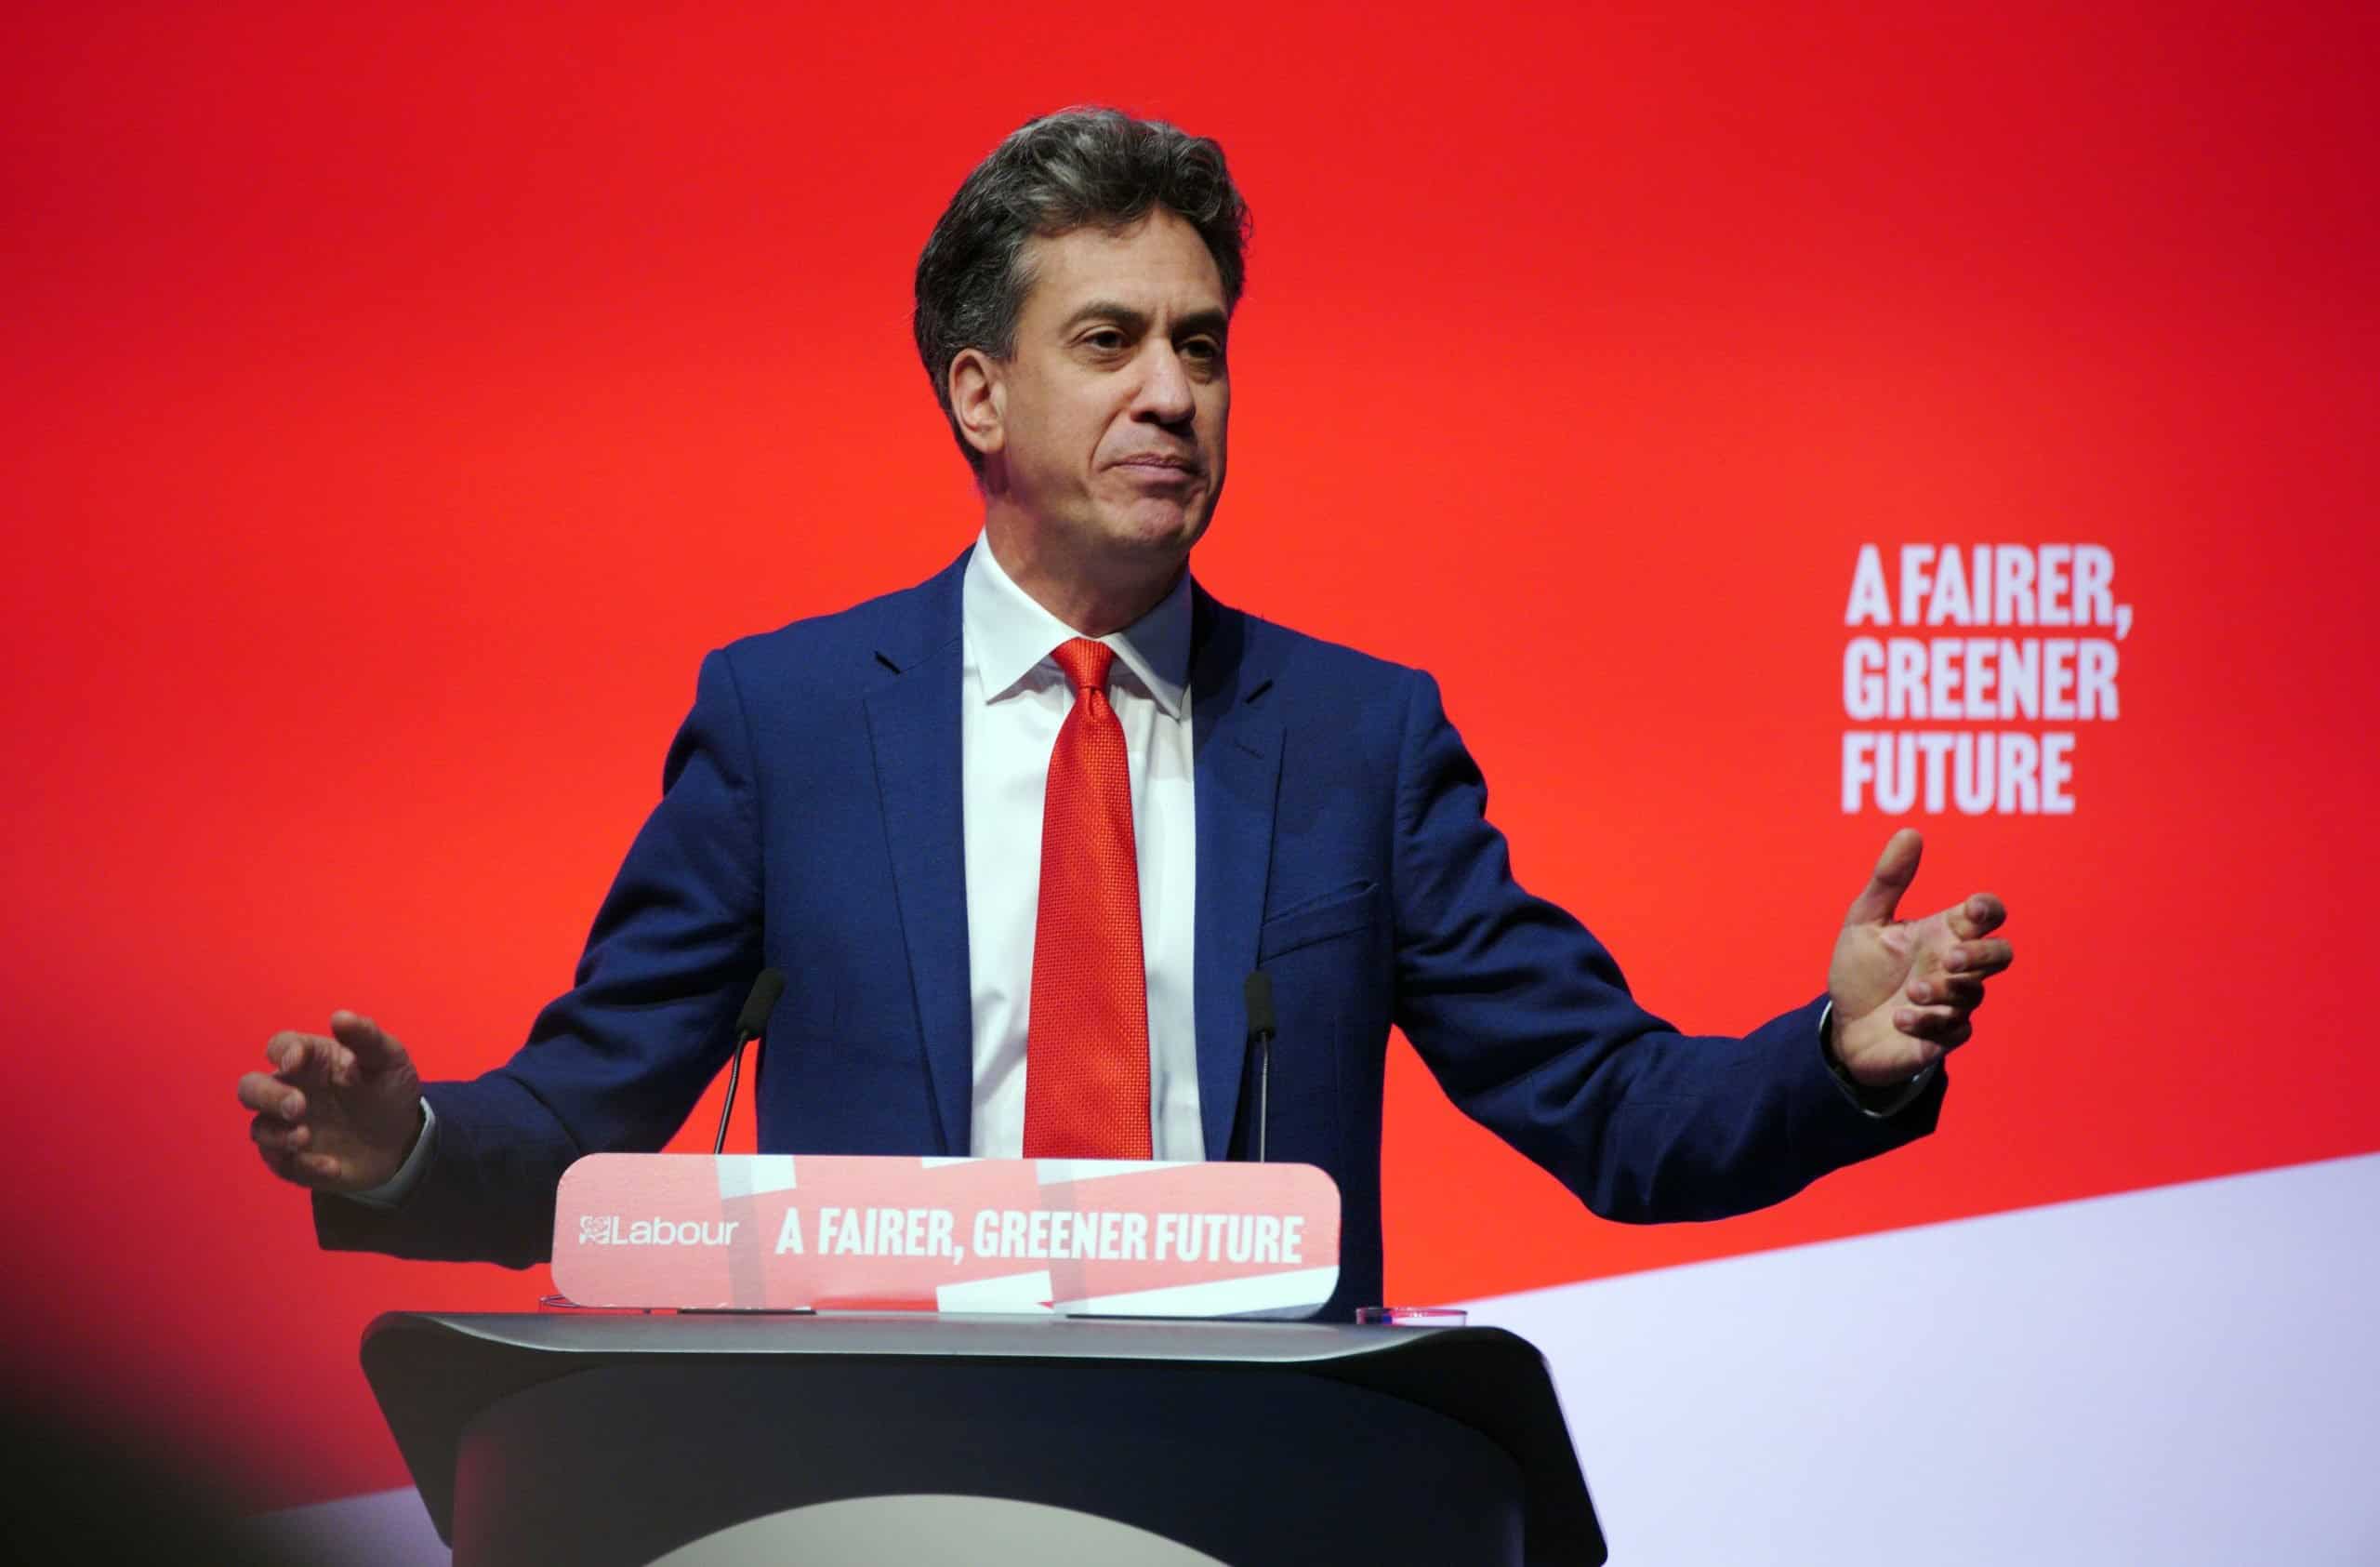 Ed Miliband backed to launch rival leadership bid among Labour rebels